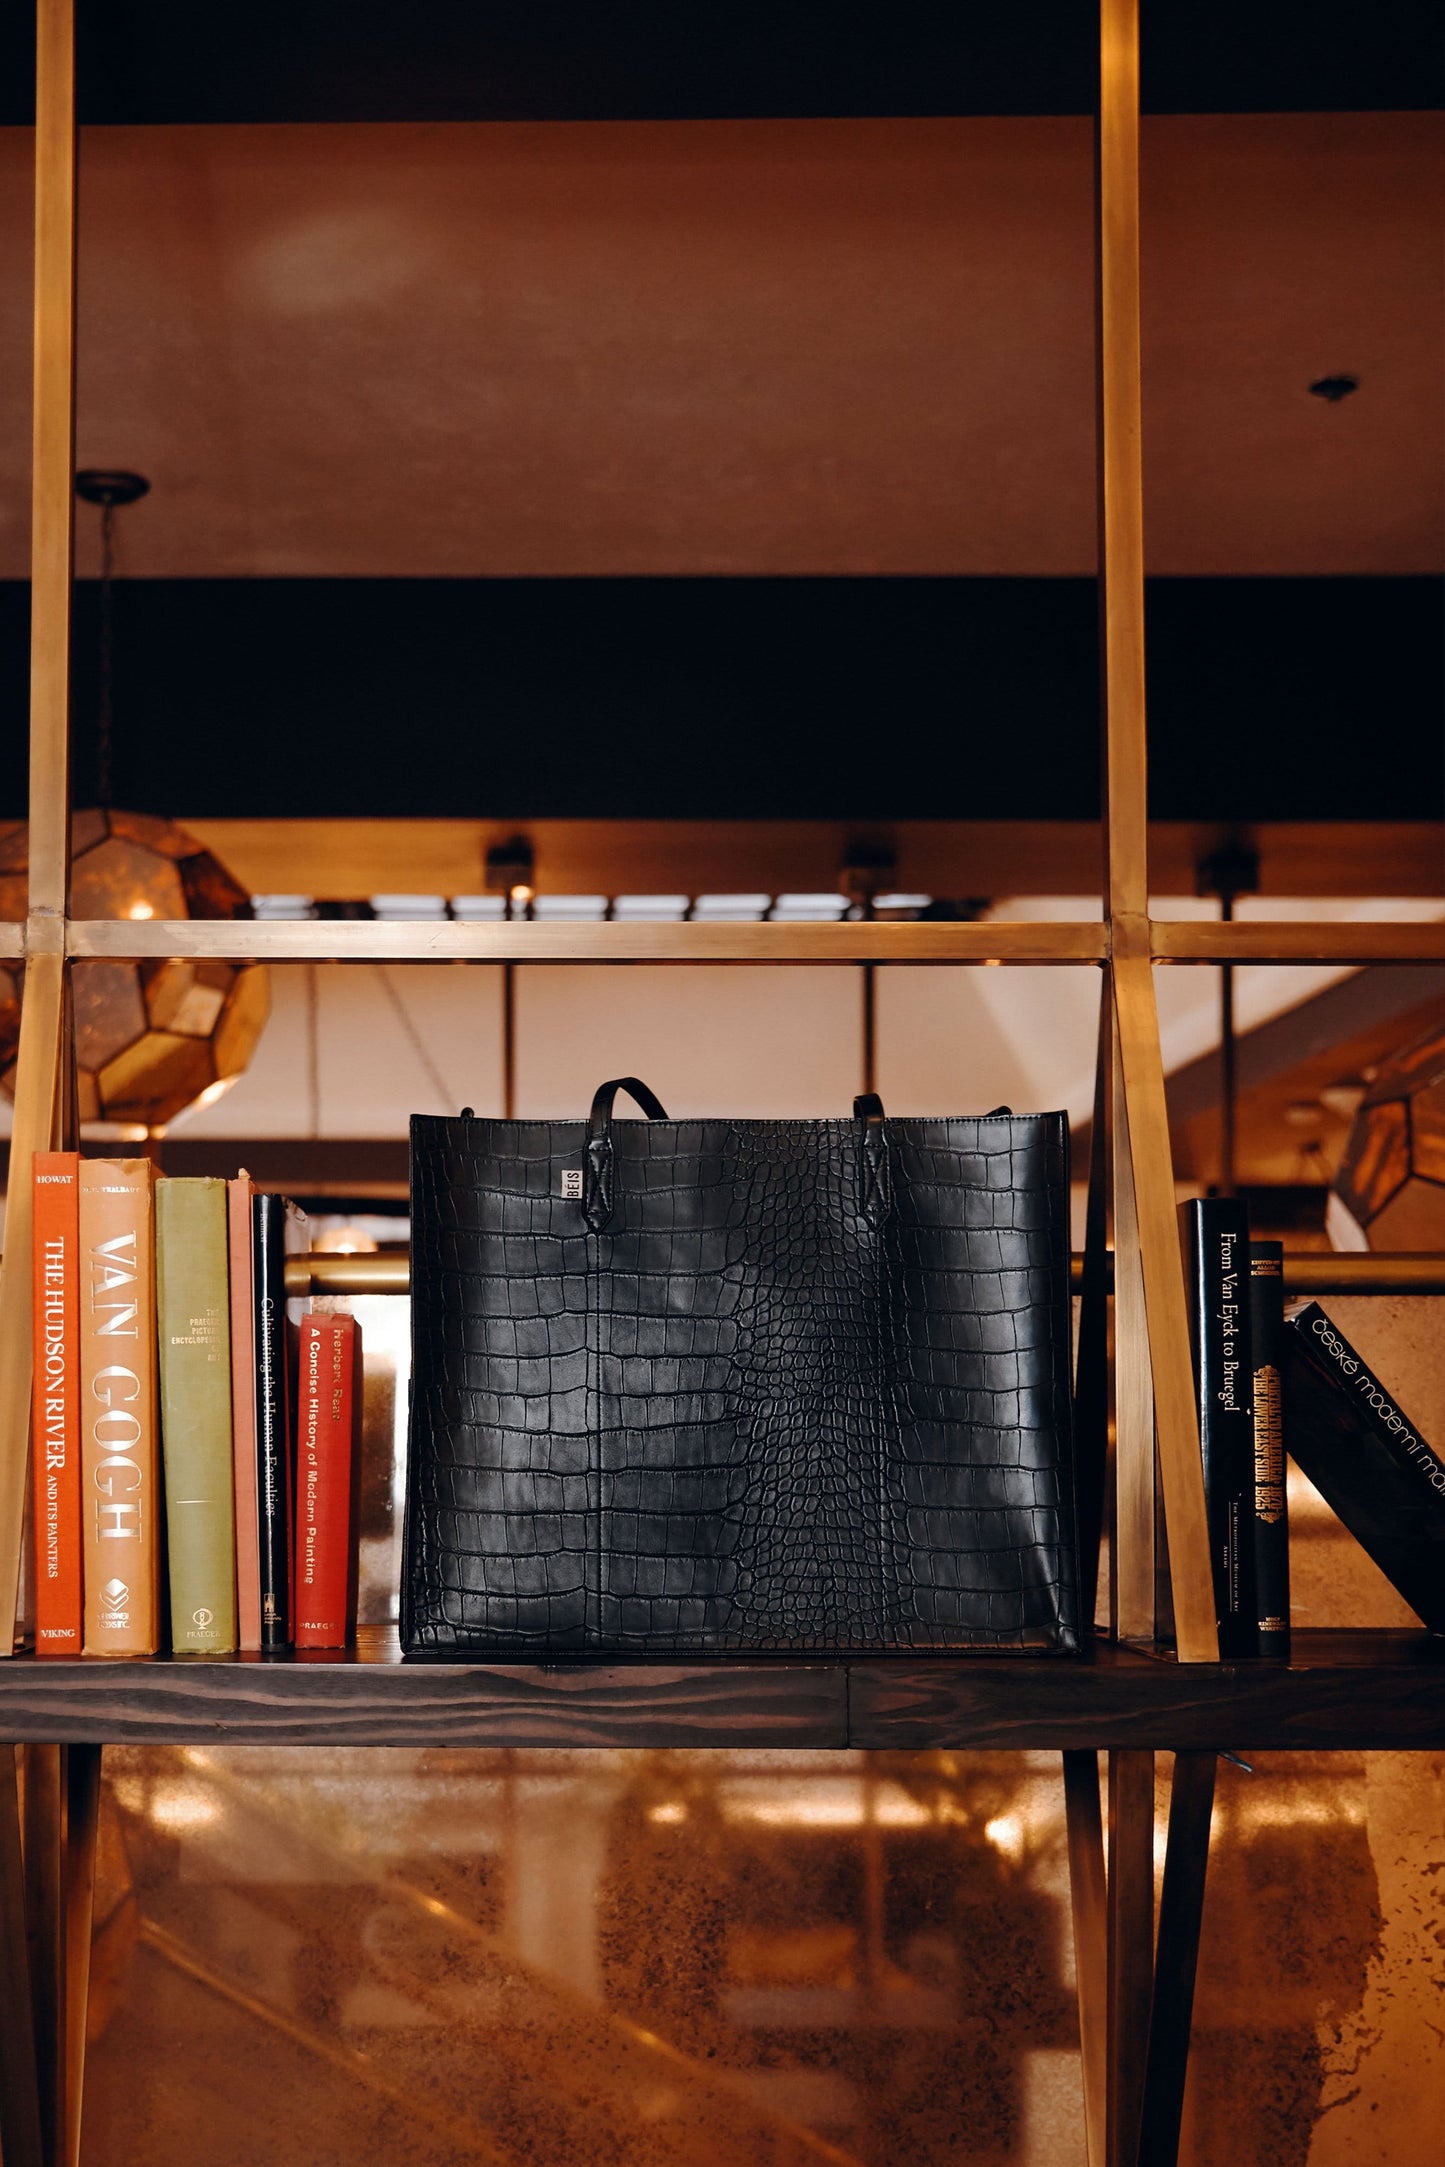 BEIS by Shay Mitchell | The Work Tote (sitting on book shelf)